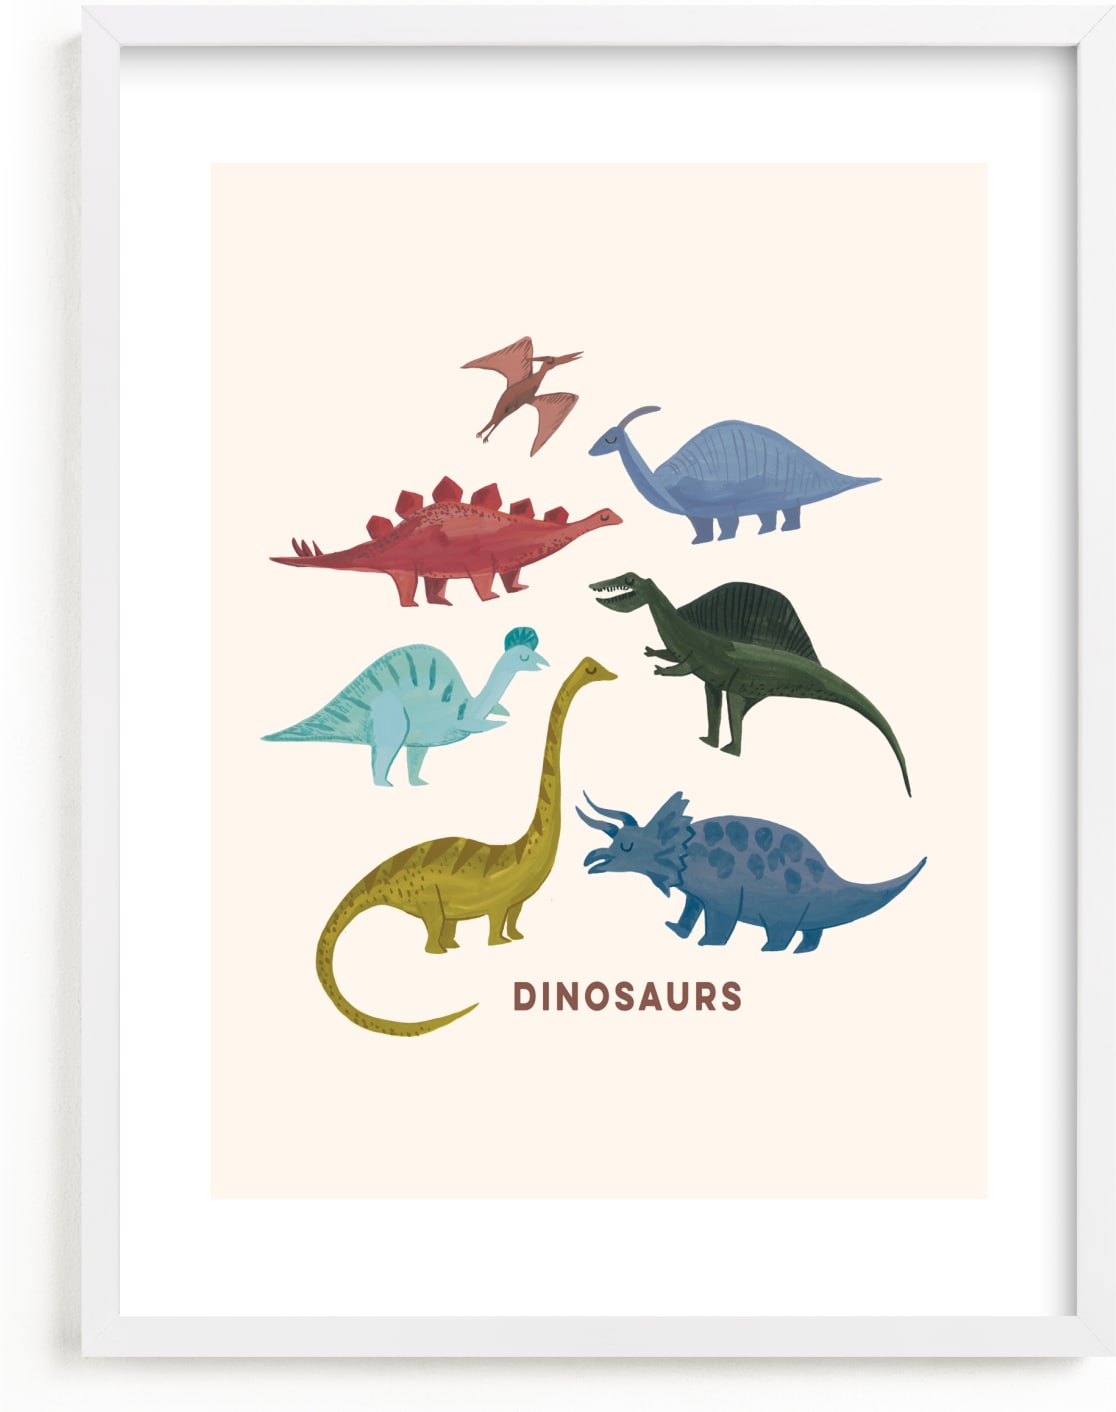 This is a blue kids wall art by Teju Reval called Dinosaurs in color.